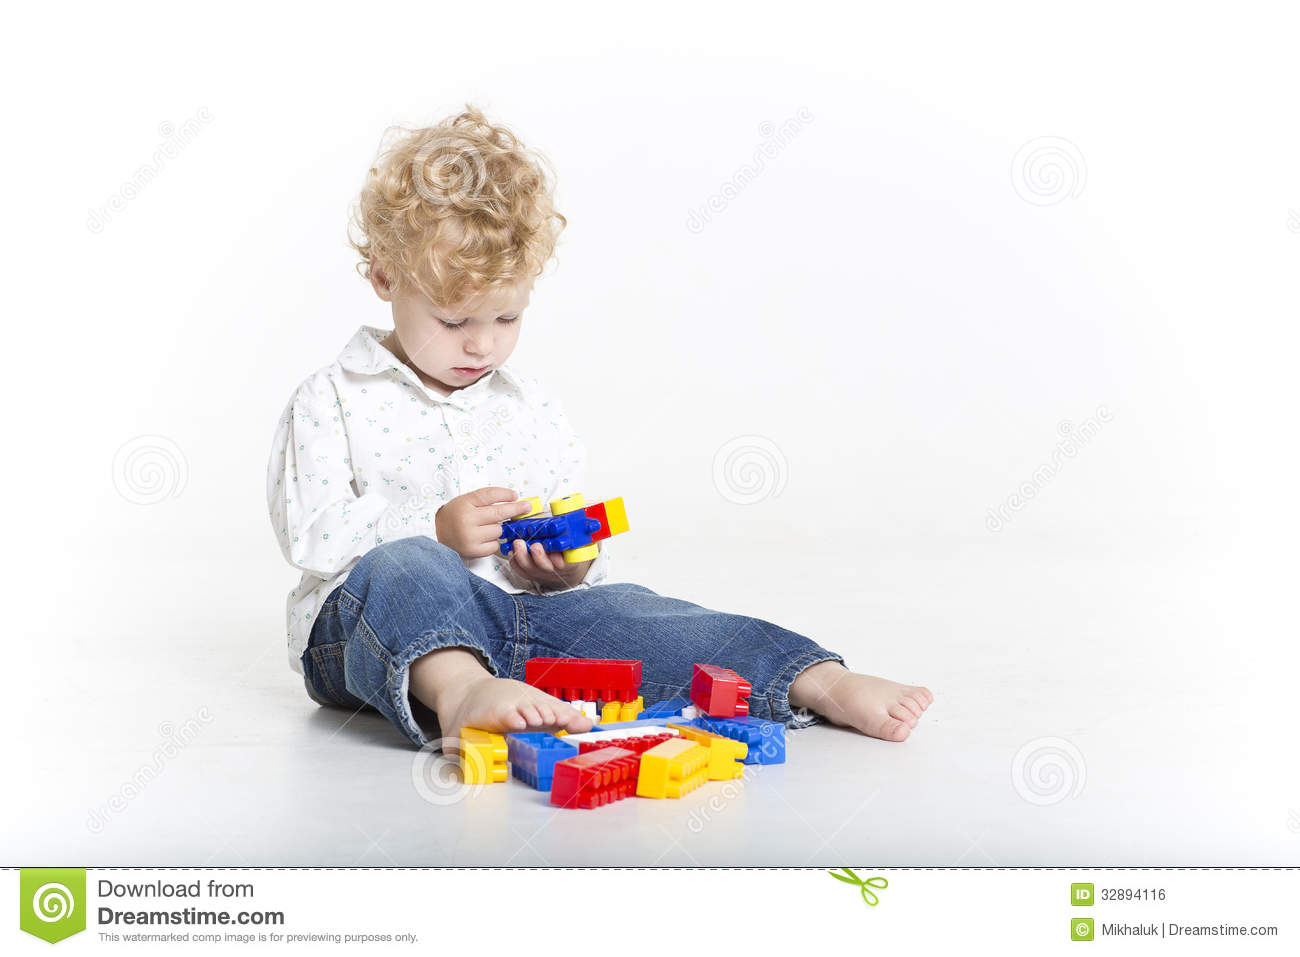 Cute Toddler Is Building With Legos Royalty Free Stock Image   Image